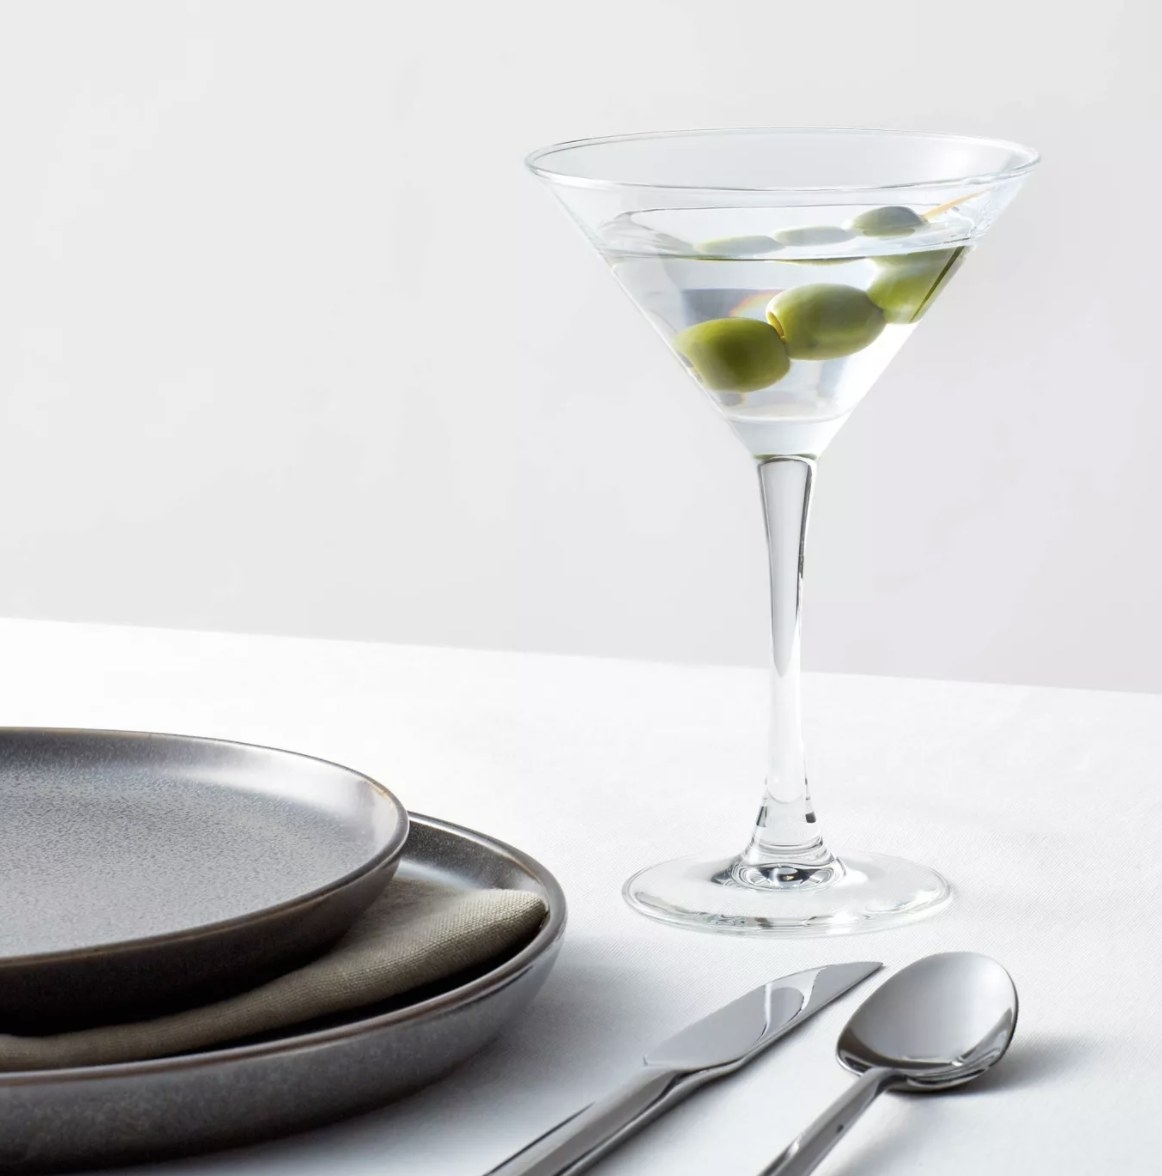 The clear martini glass is 3/4 of the way filled with a clear liquid and three green olives